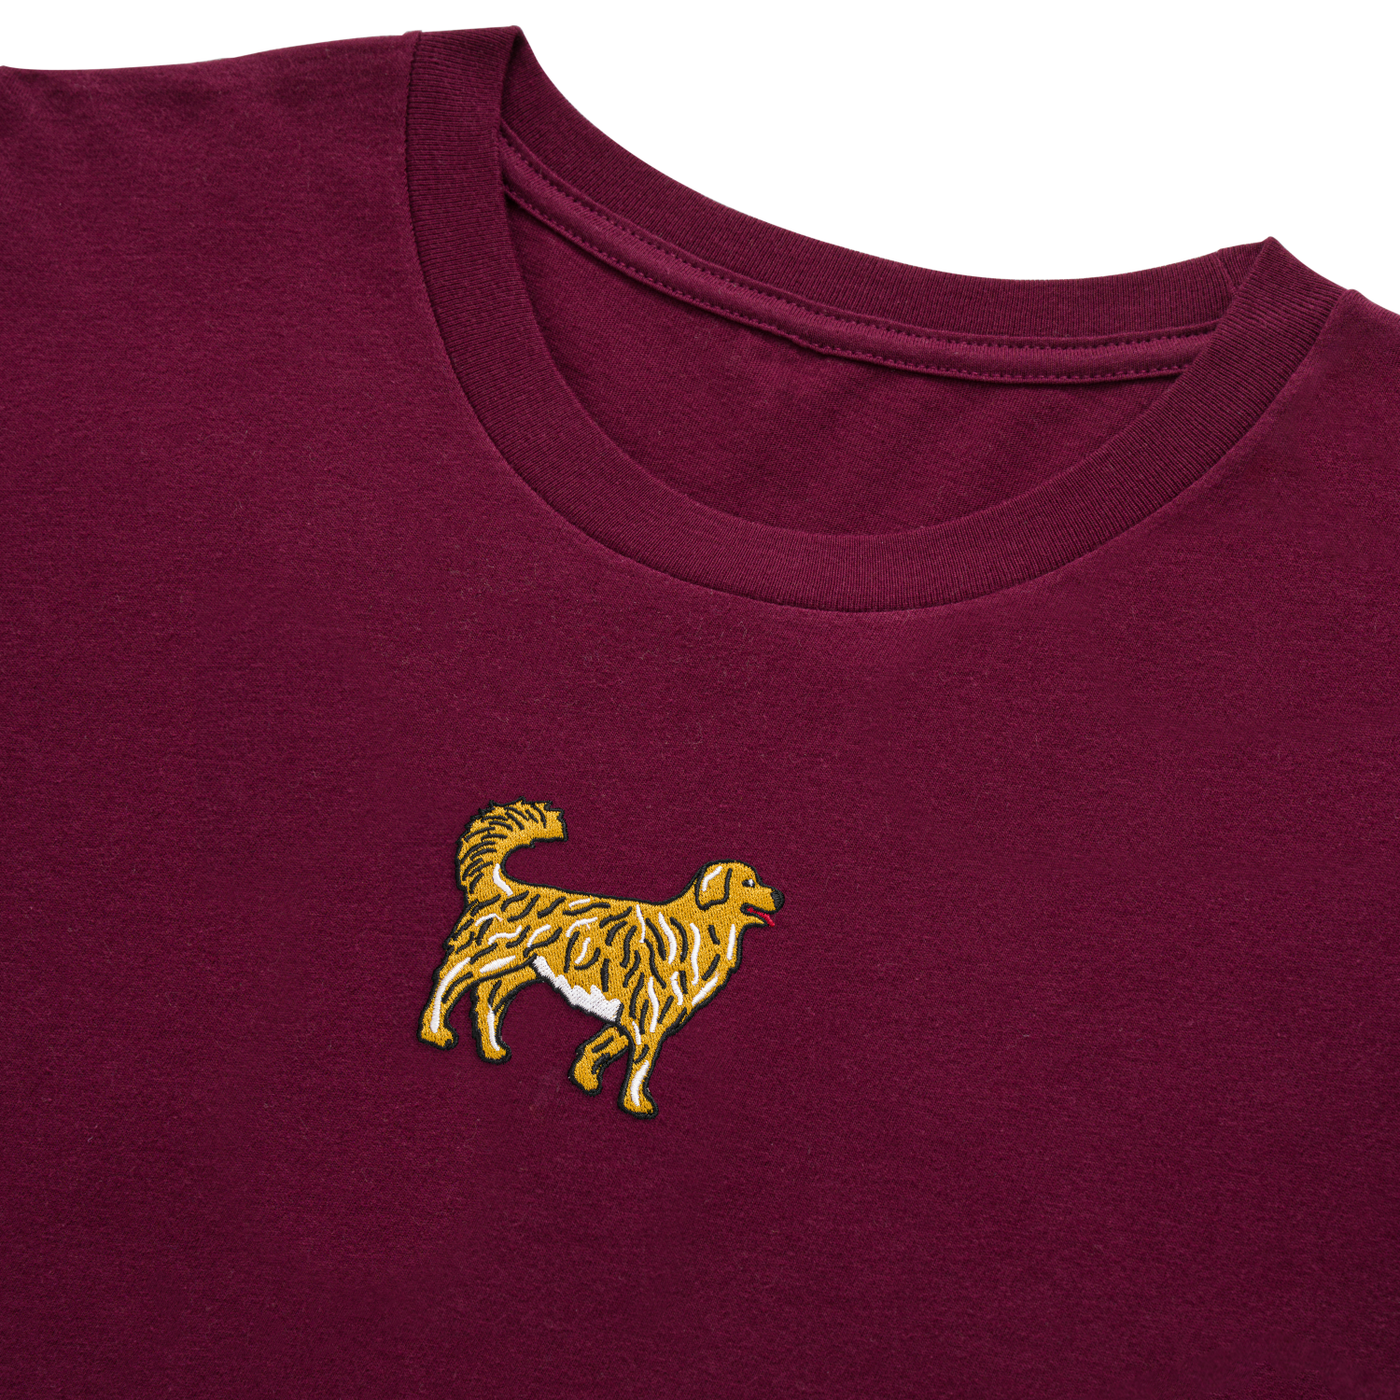 Bobby's Planet Men's Embroidered Golden Retriever Long Sleeve Shirt from Paws Dog Cat Animals Collection in Maroon Color#color_maroon